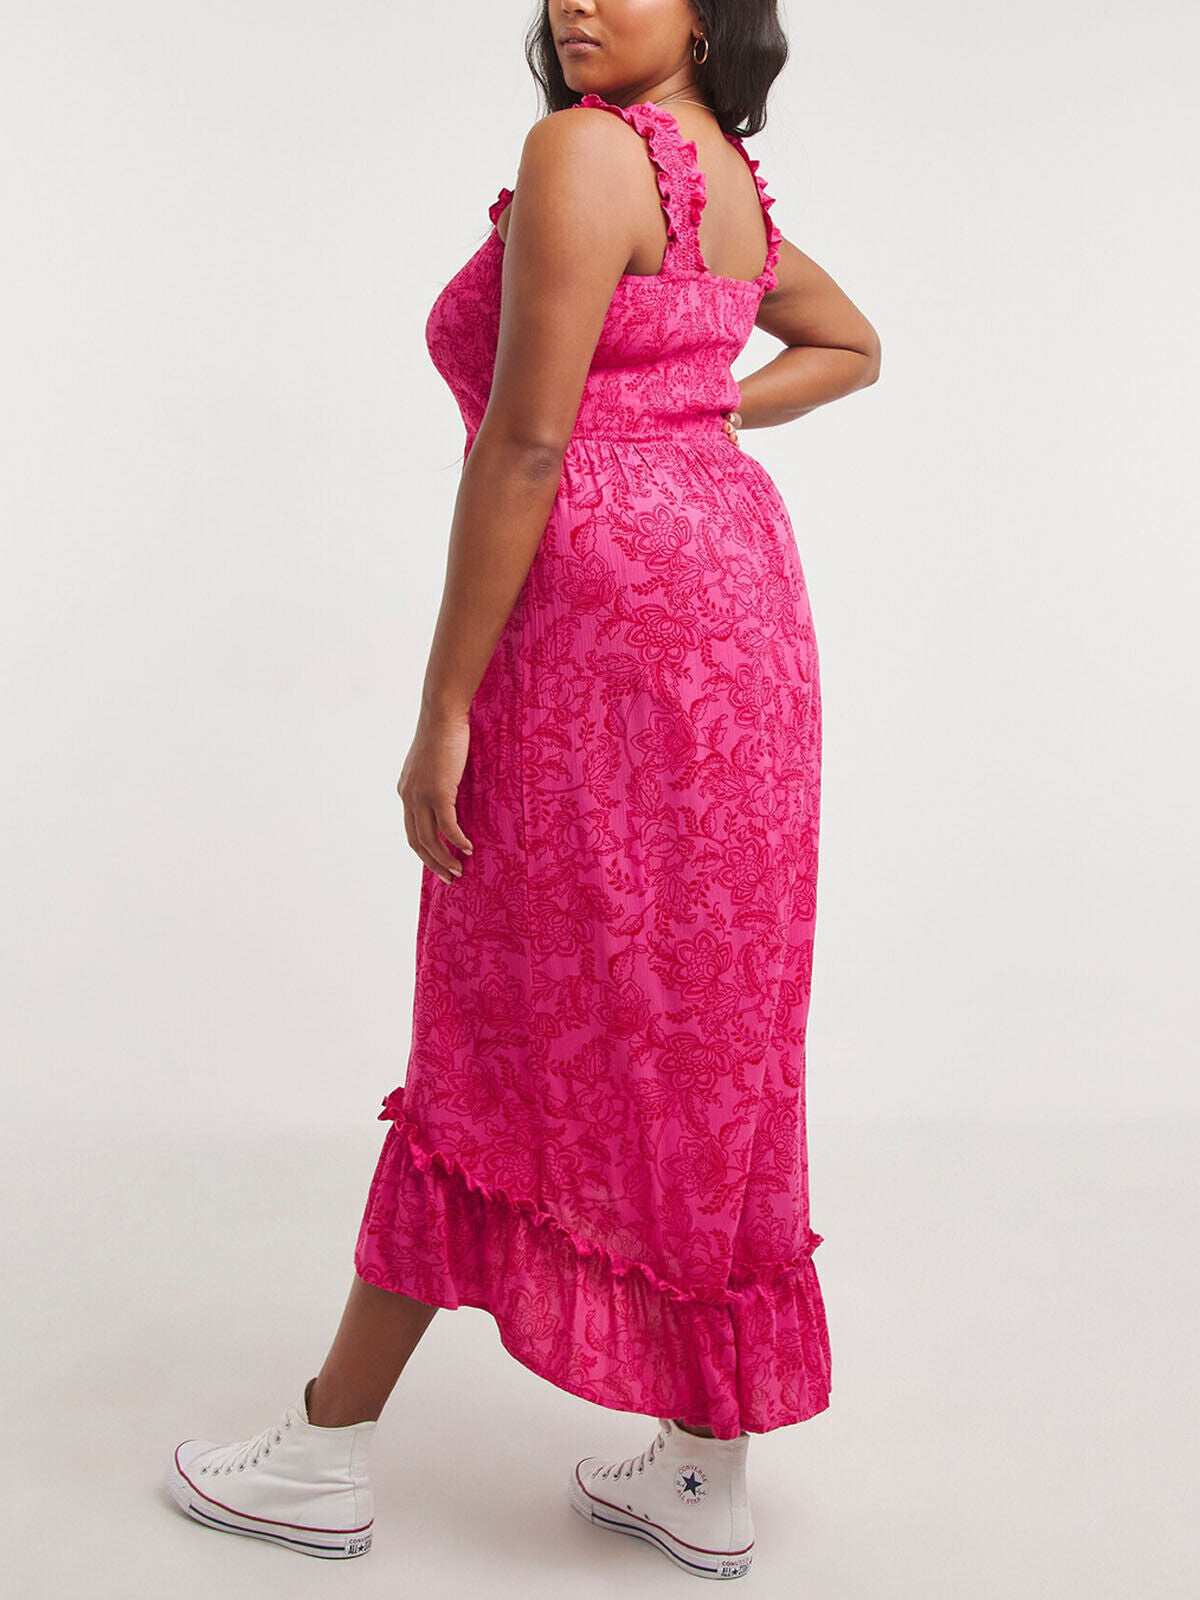 Simply Be Pink Floral Crinkle Maxi Dress Sizes 16 20 22 24 26 28 30 32 RRP £39